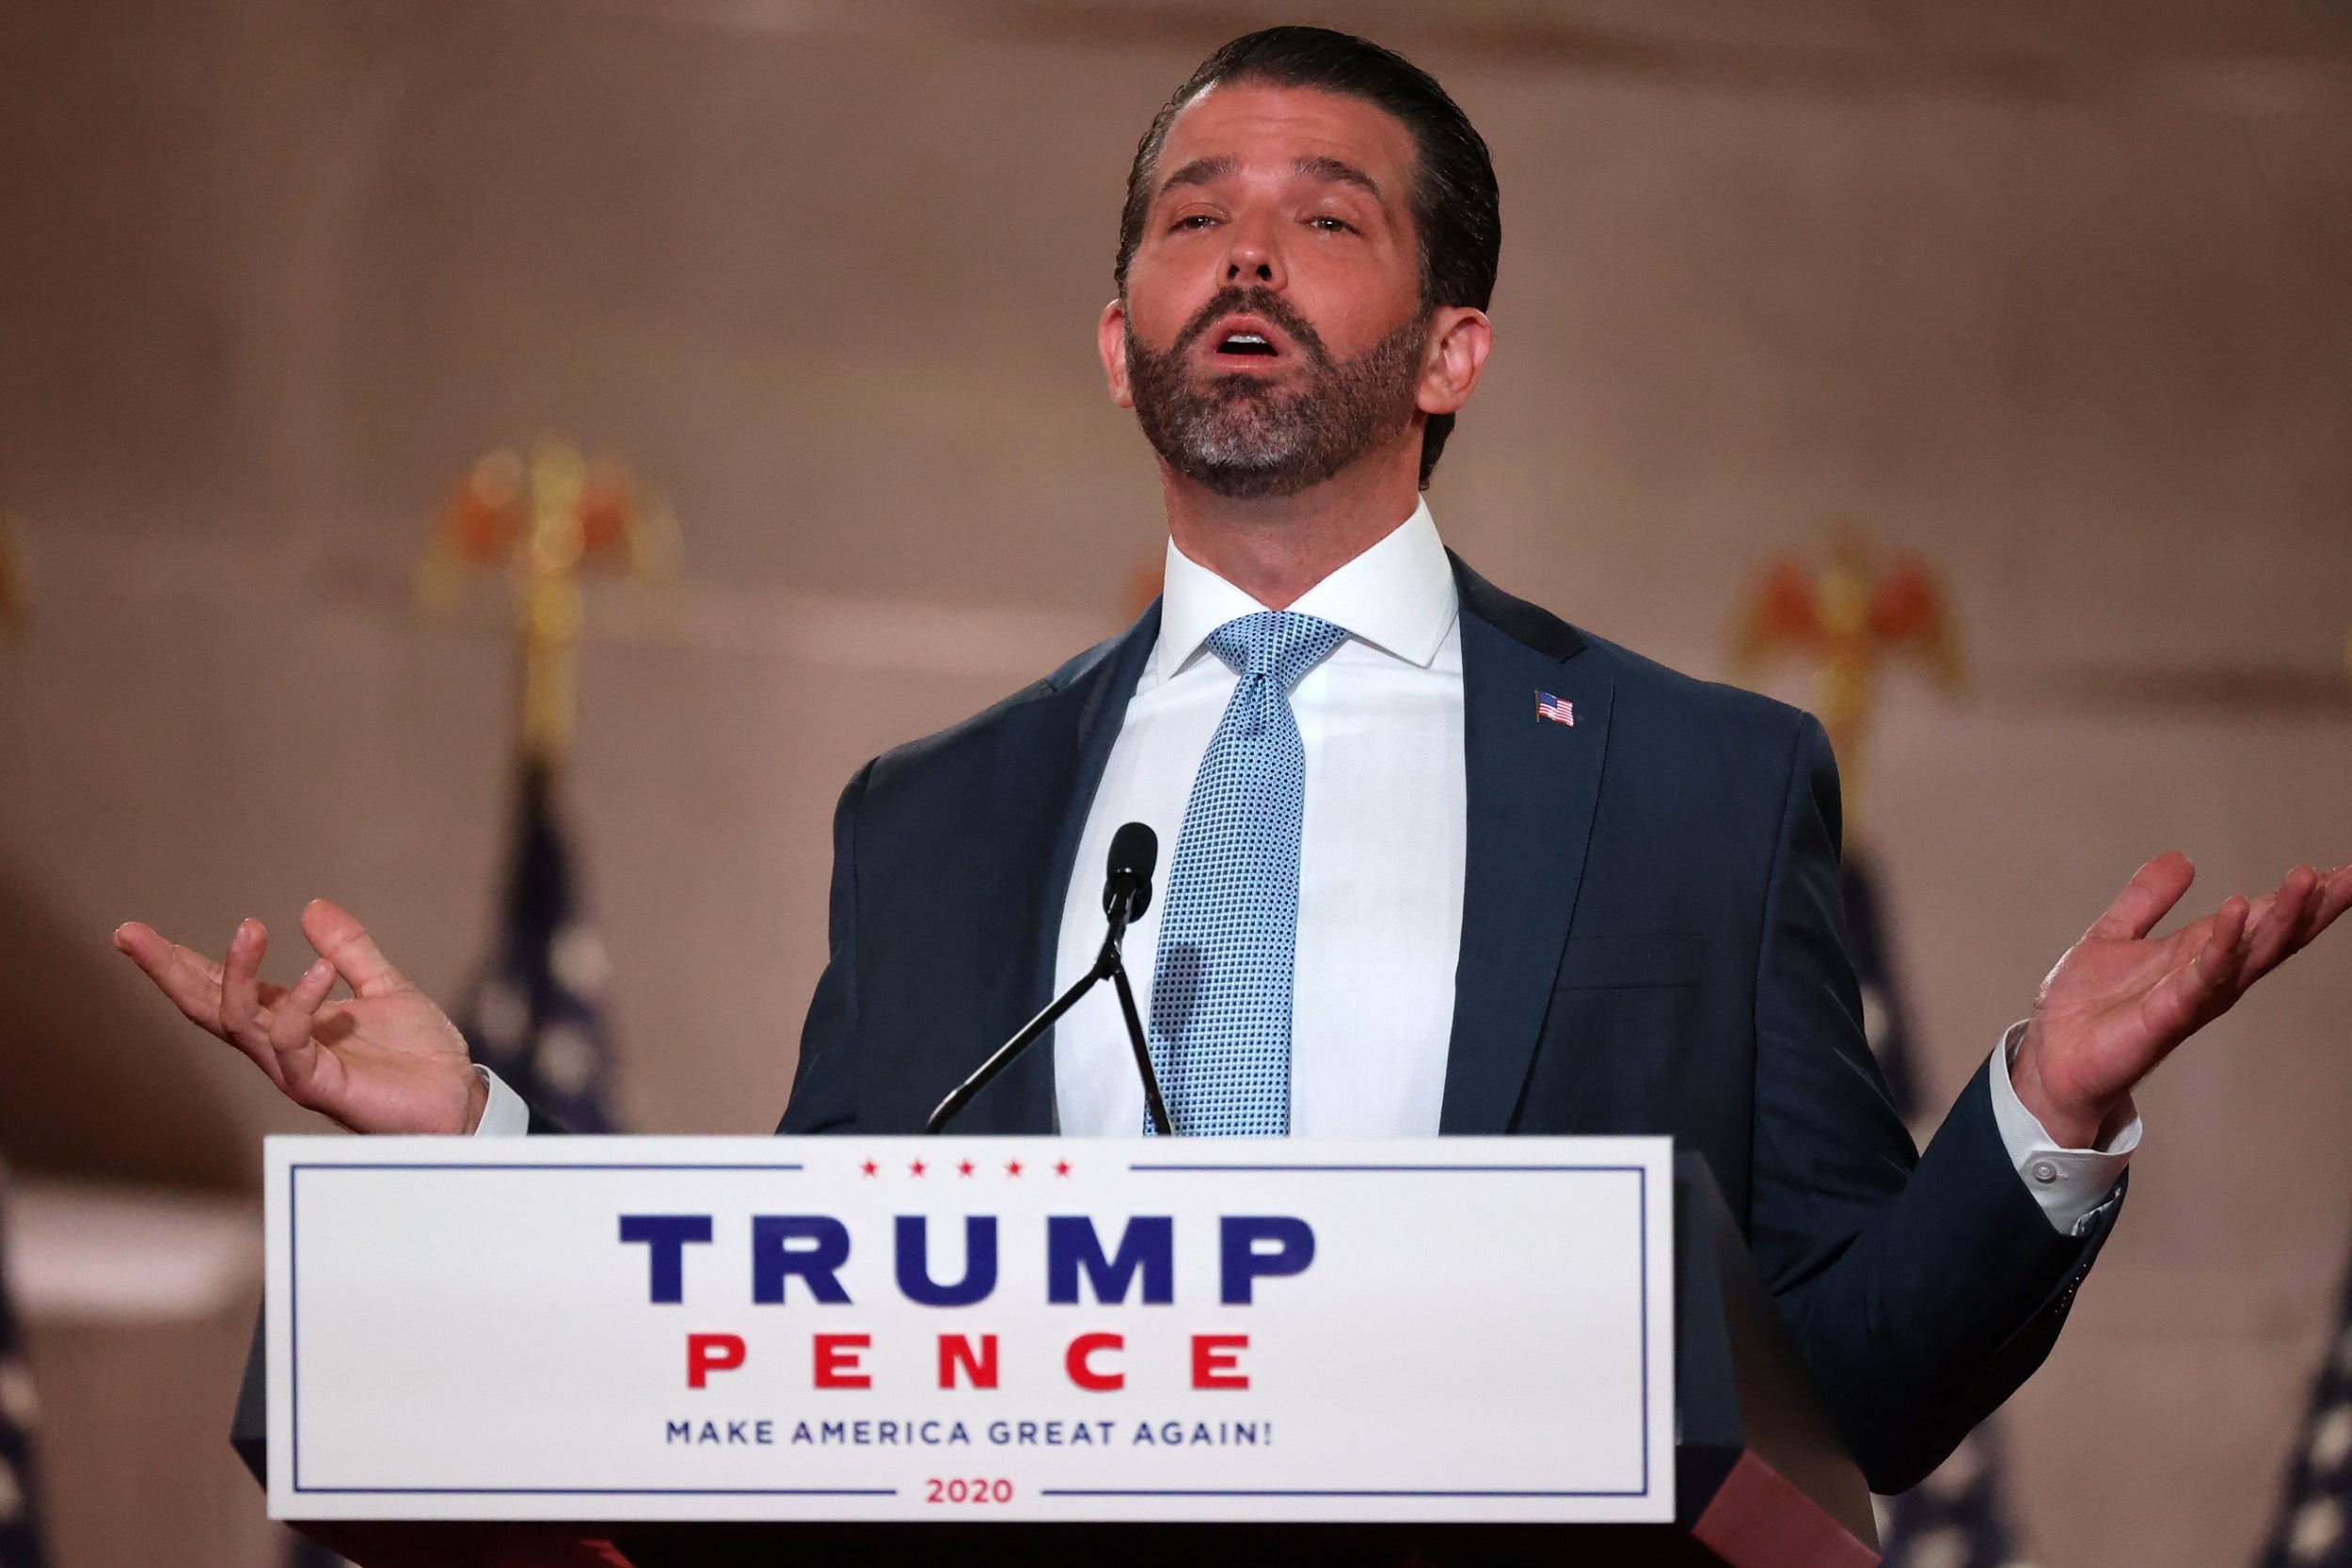 Donald Trump Jr speaks at the Republican National Convention on 24 August, 2020